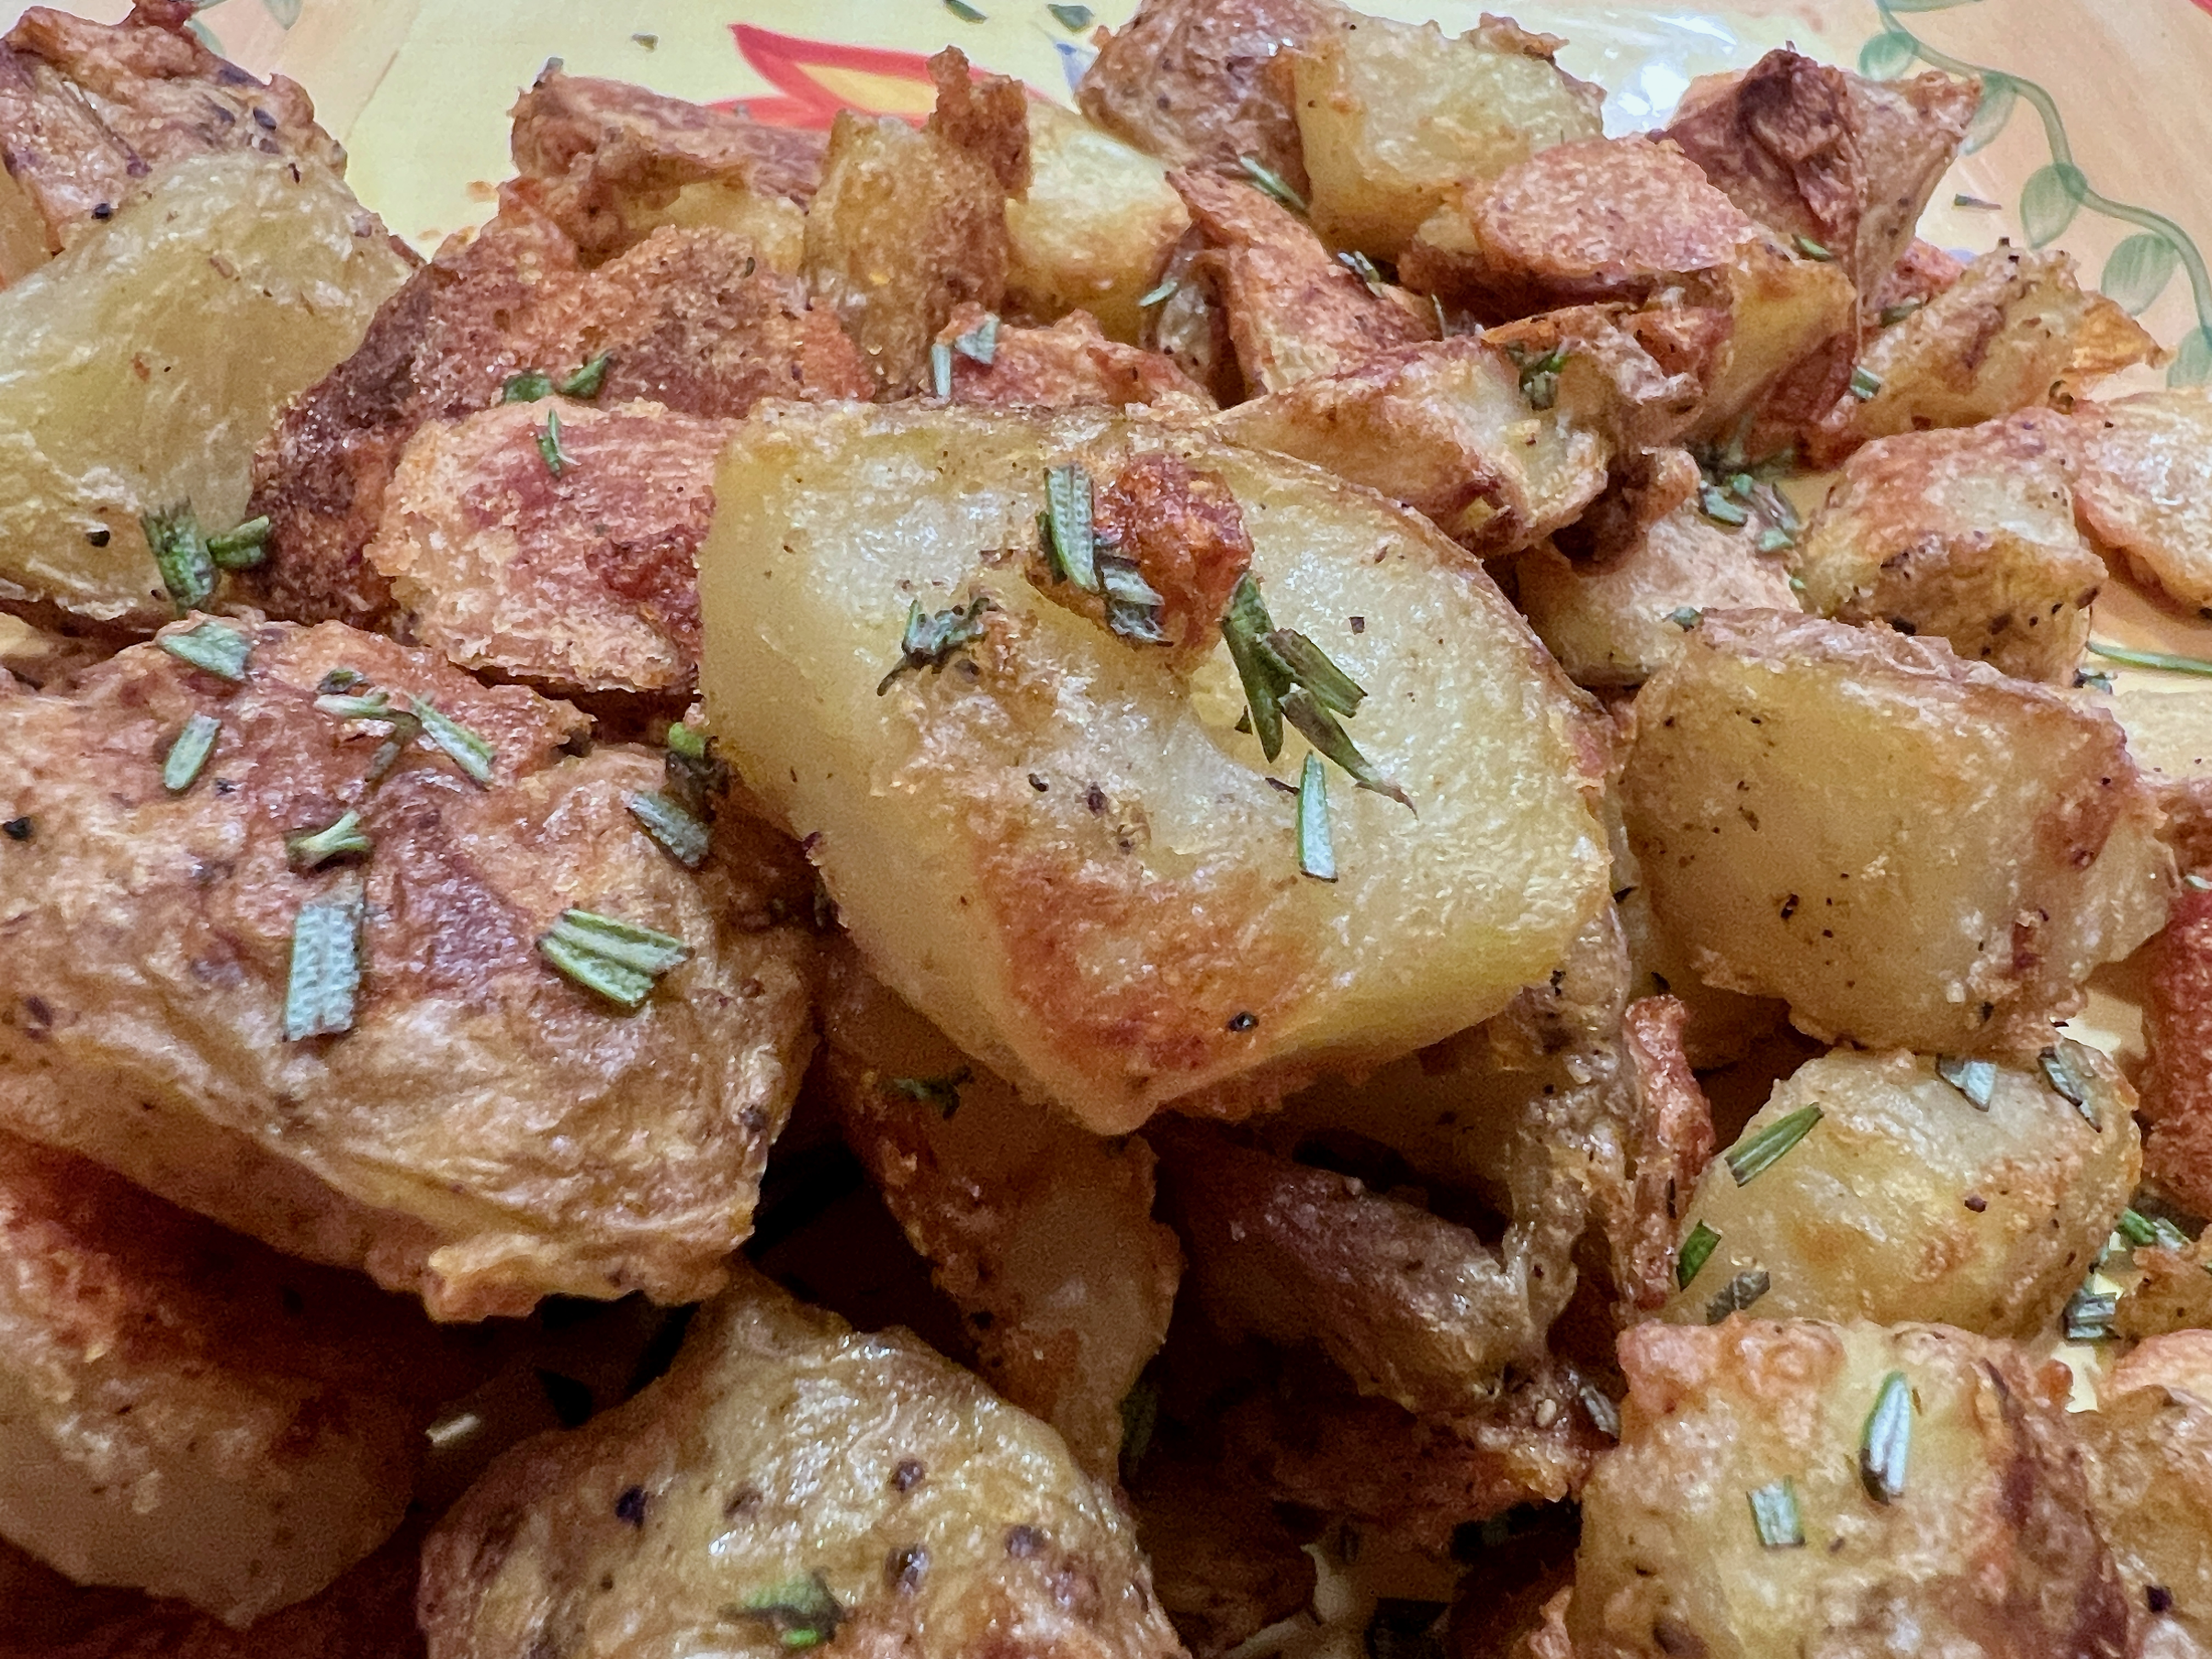 Golden-brown skin-on potato pieces, with crispy and craggily edges.